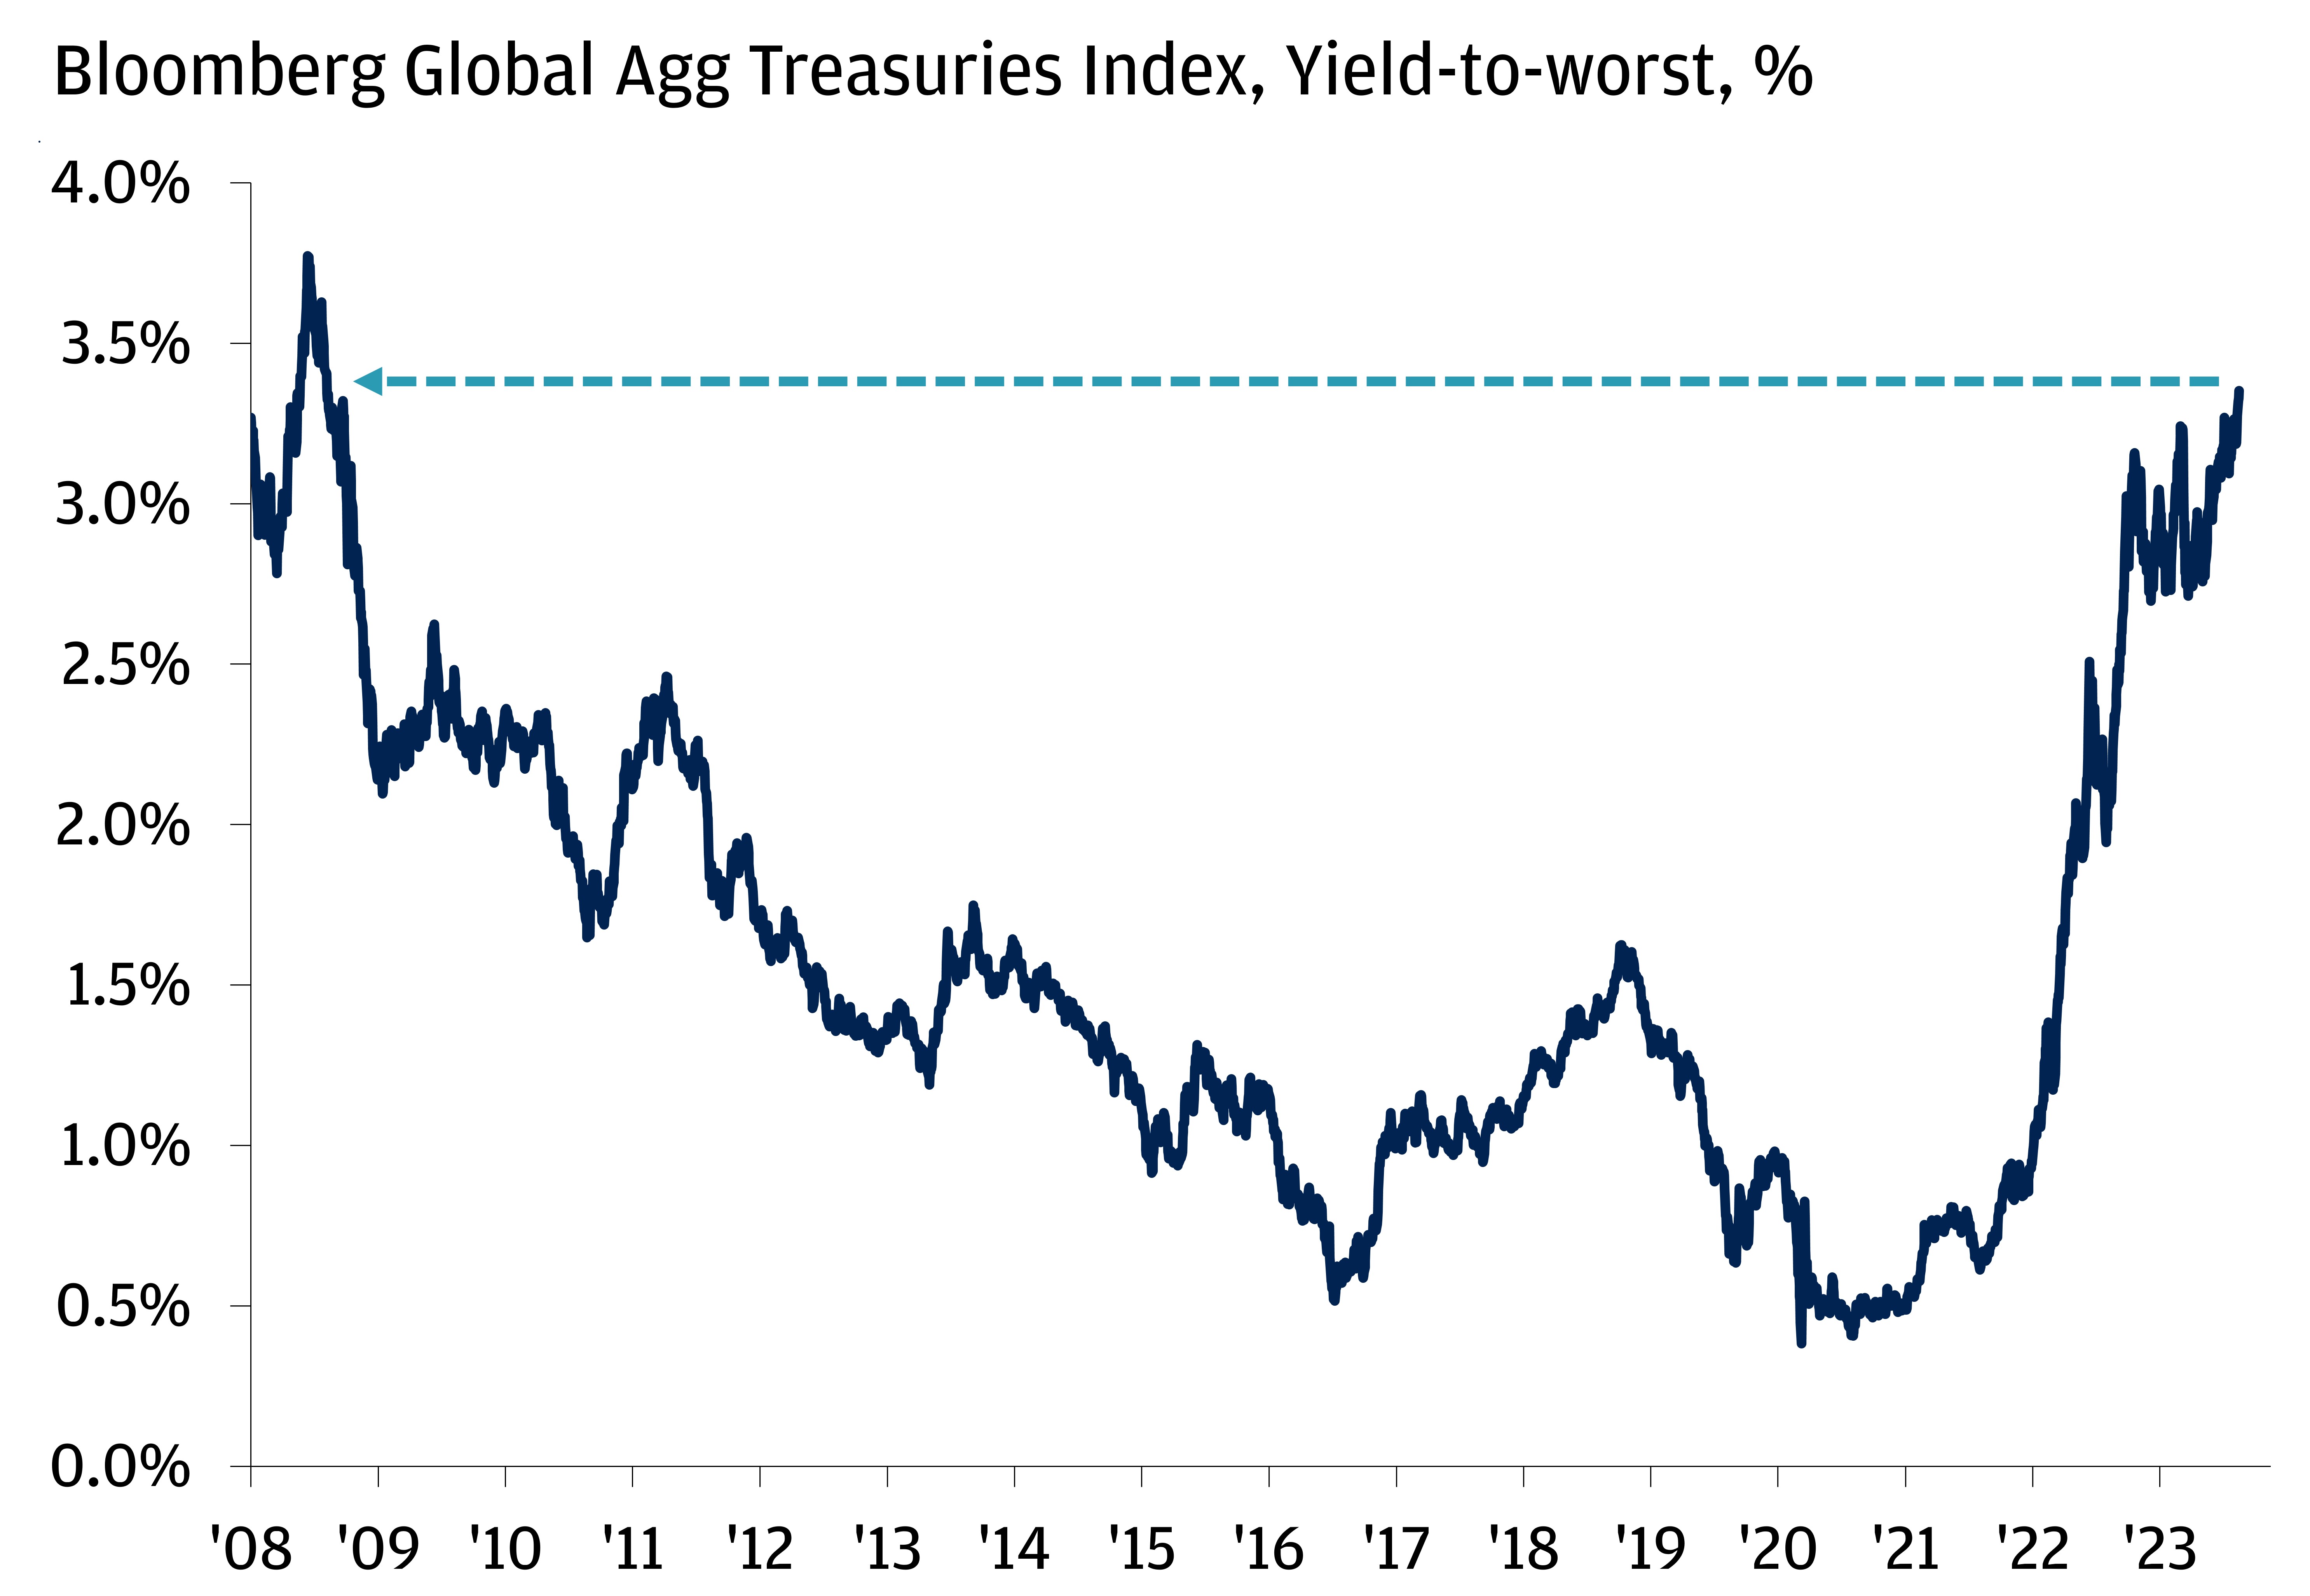 This chart shows bond yields measured by the Bloomberg Global Aggregate Treasuries Index from 2008 through 2023.